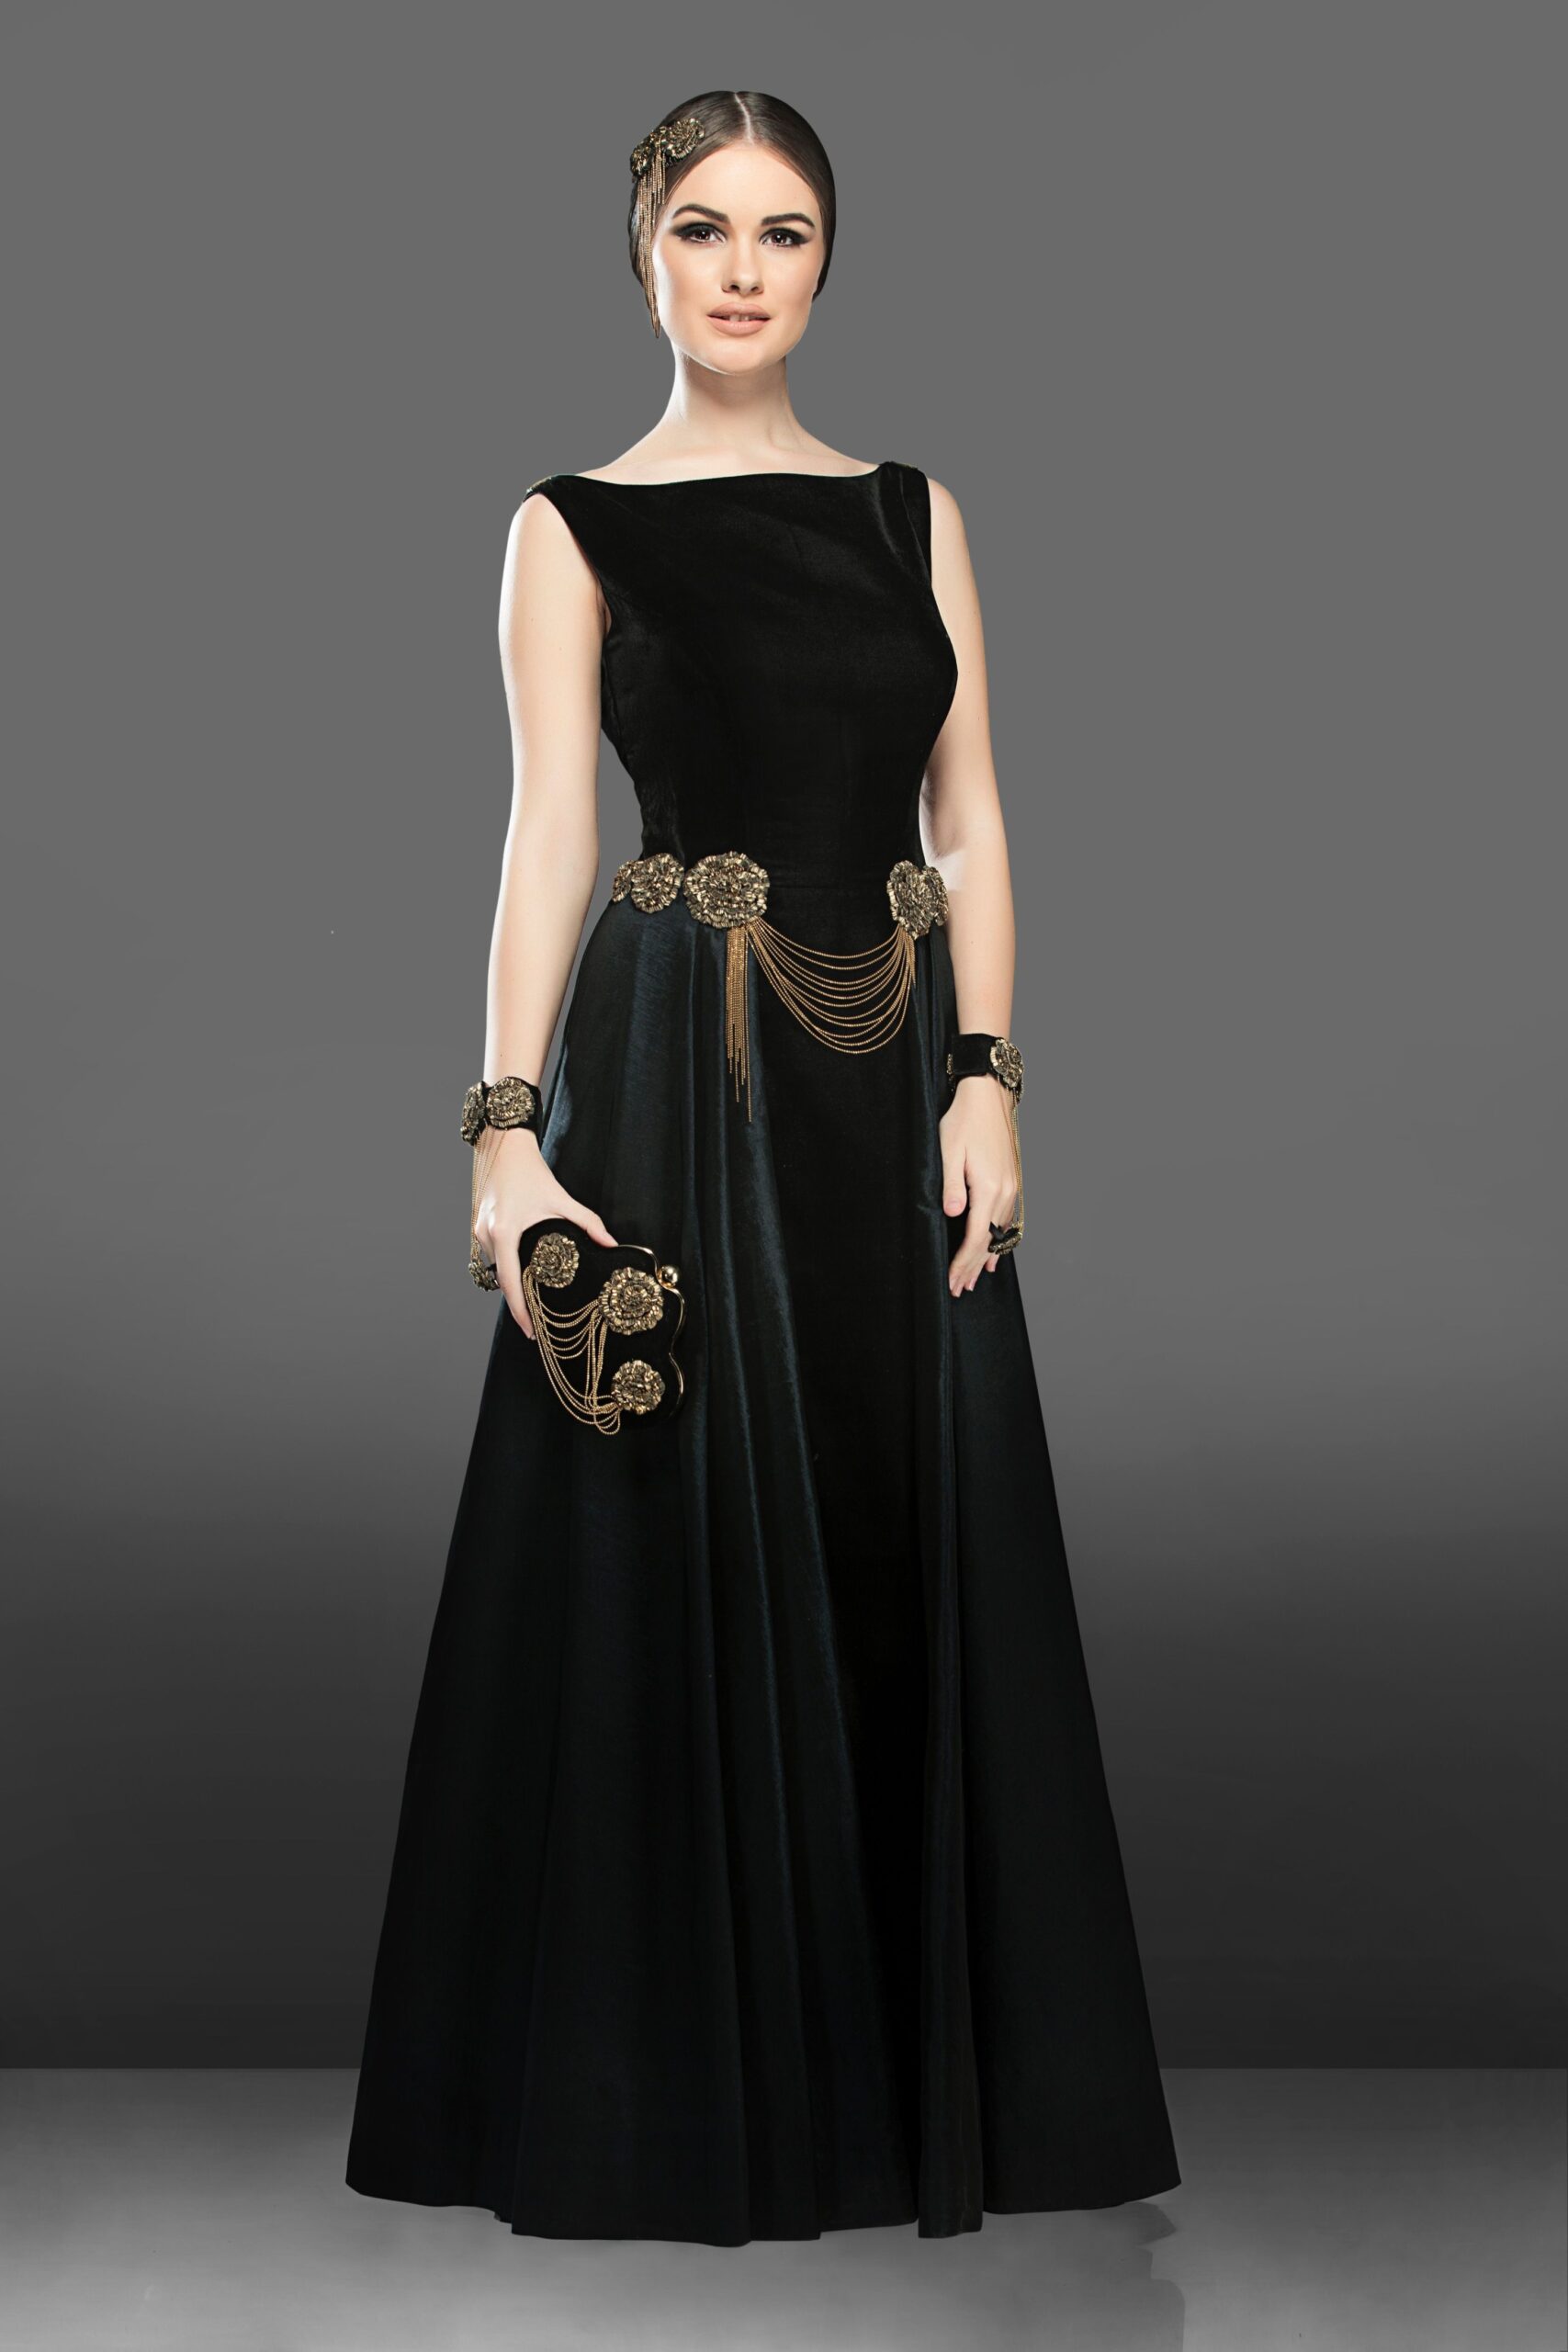 accessories for black gown Bulan 2 An exclusive black gown with complimenting accessories